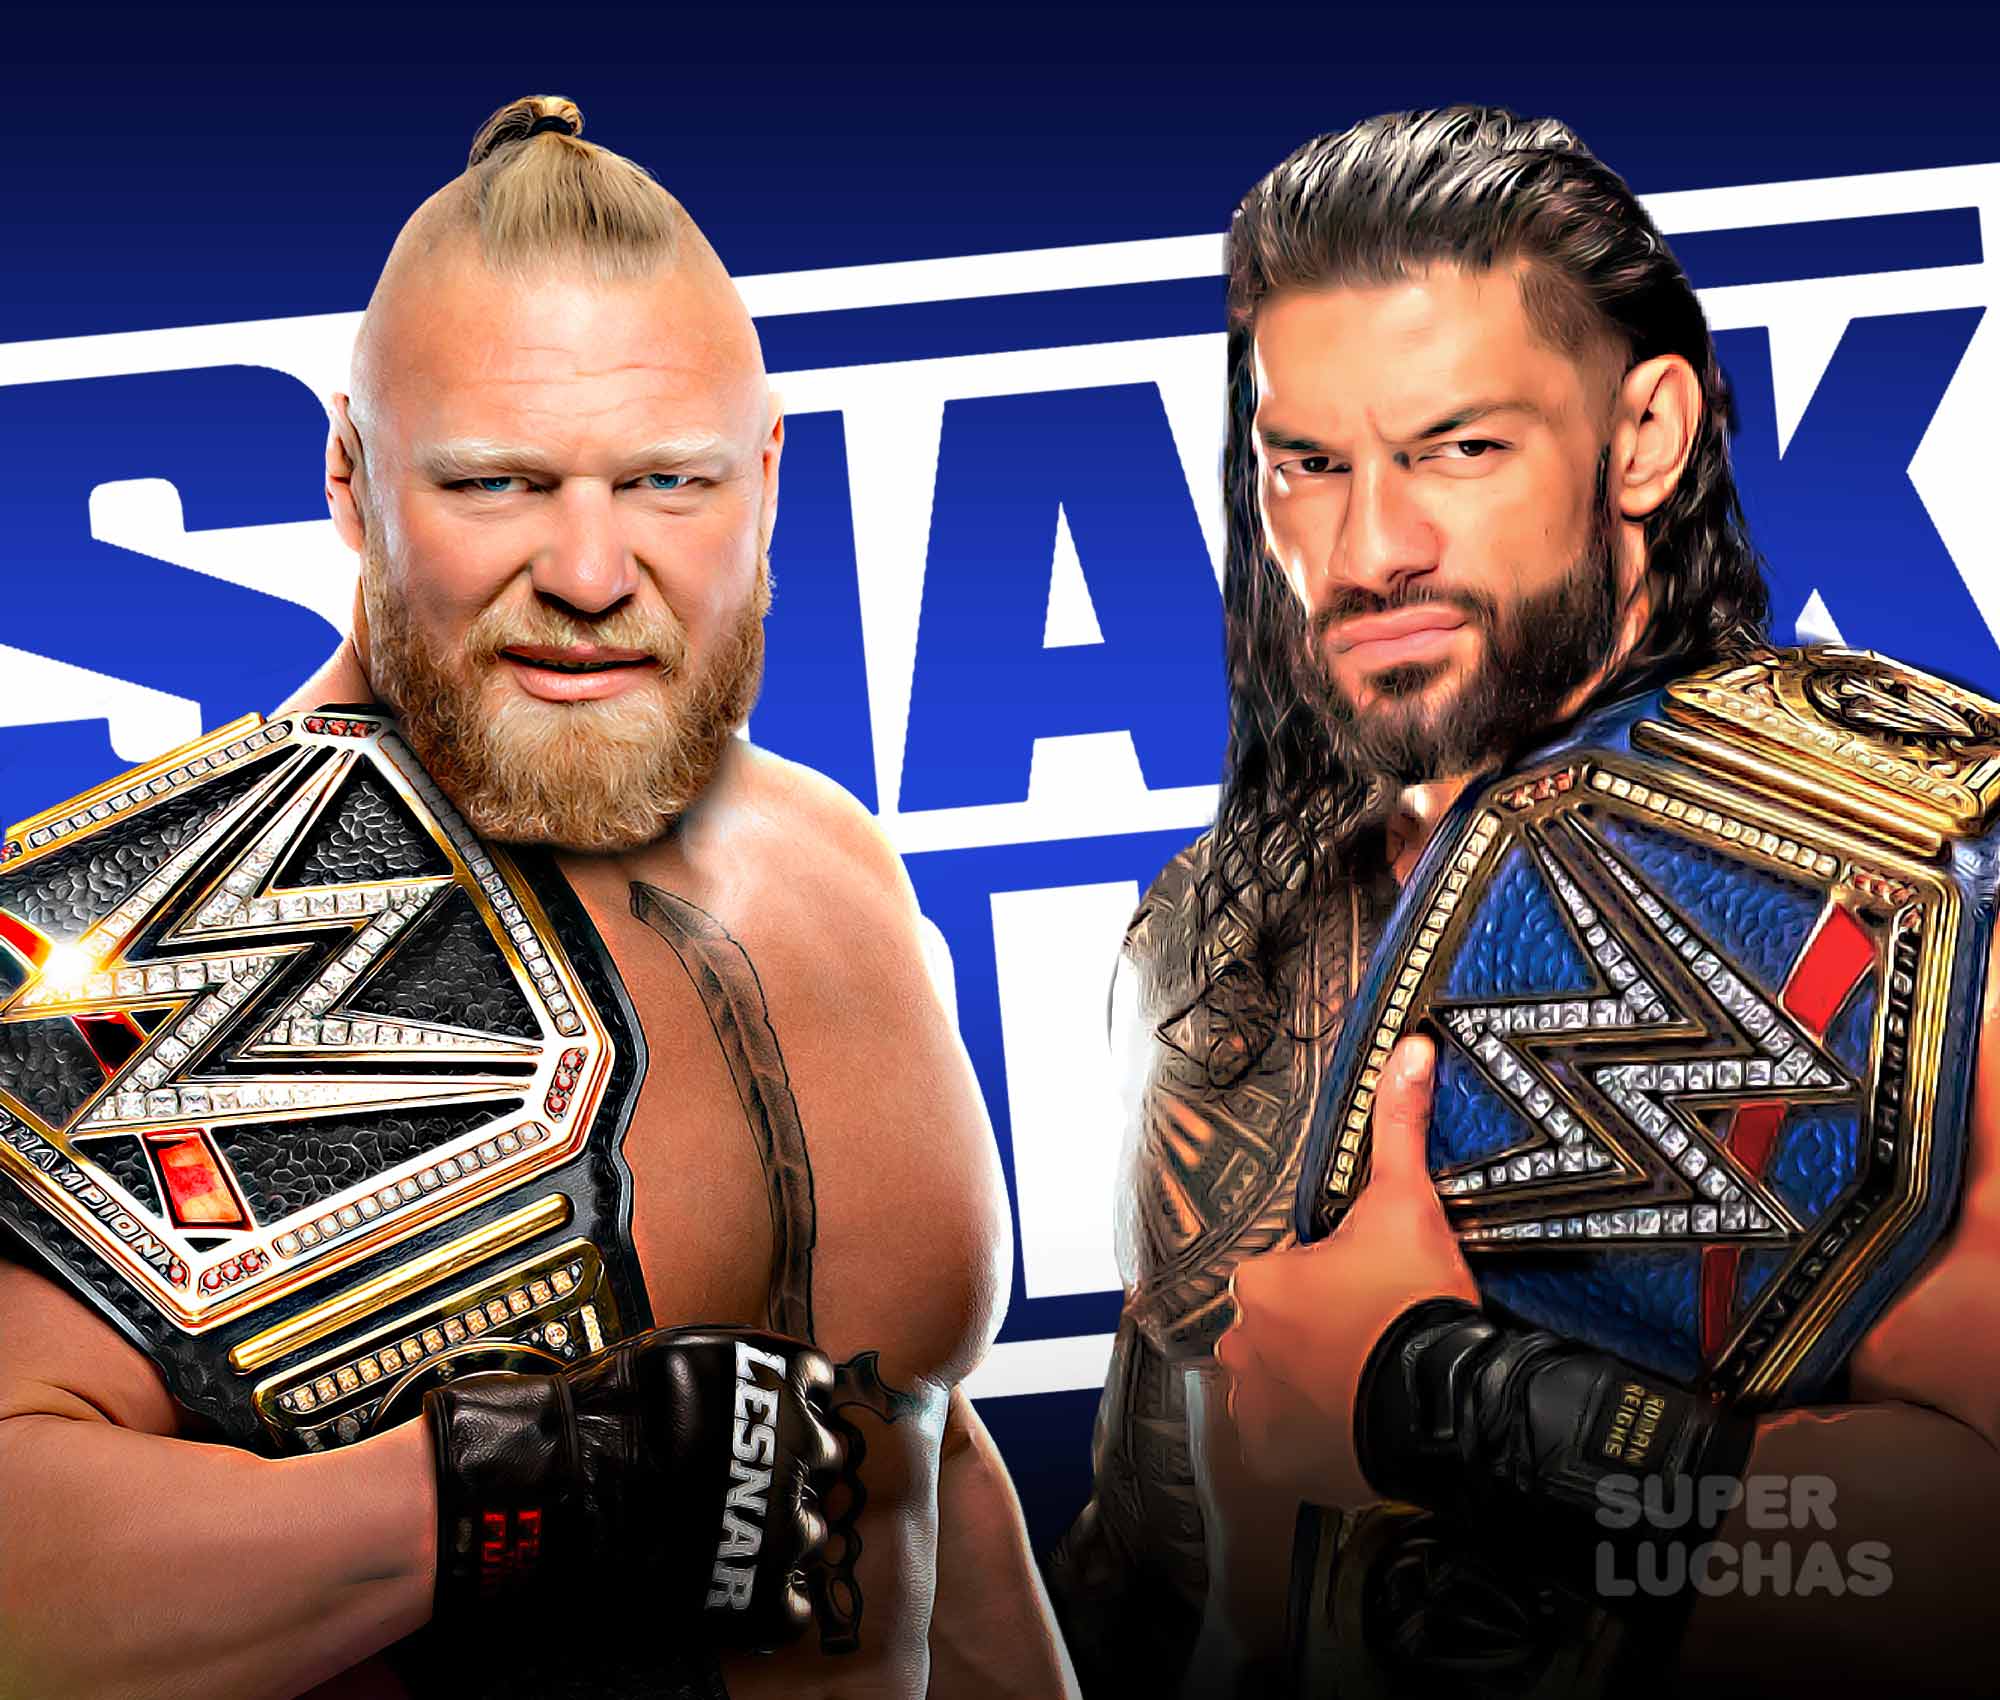 WWE SMACKDOWN February 25 2022 Live results Brock